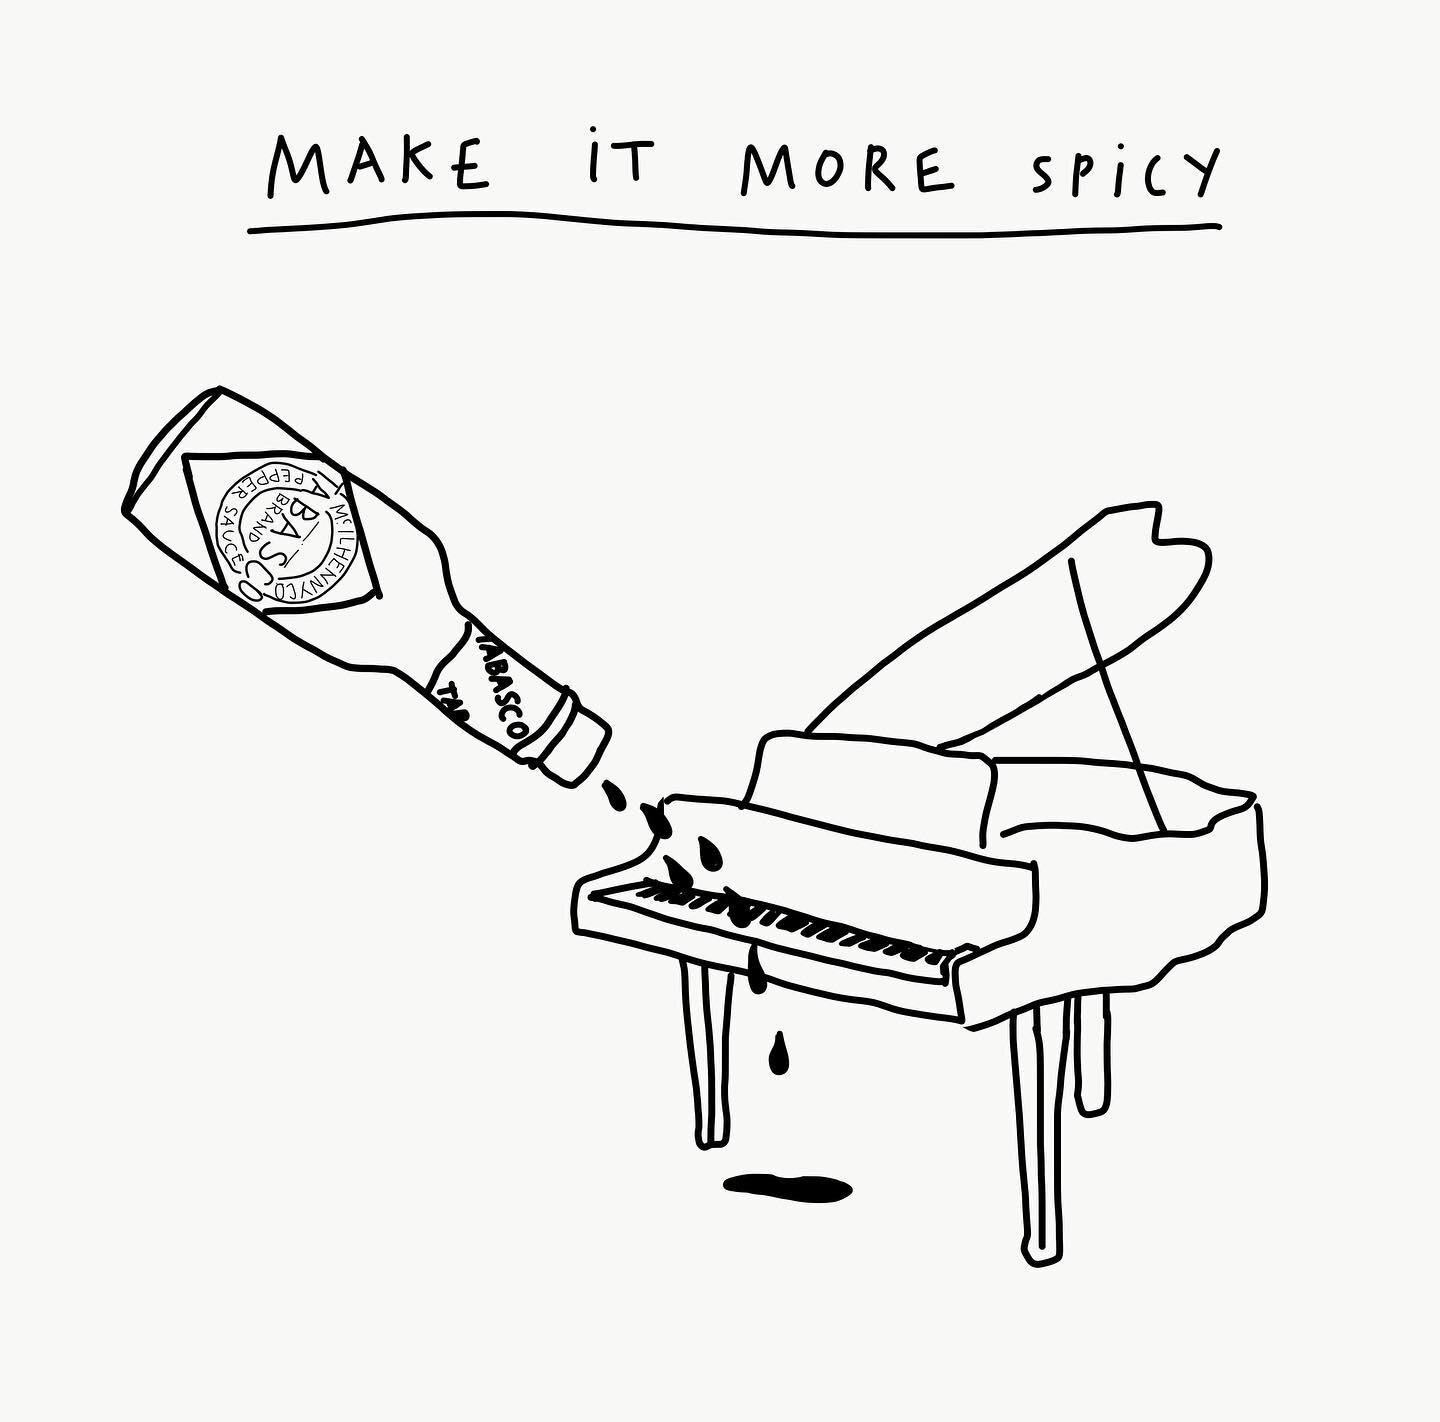 &ldquo;Make It More Spicy&rdquo; This week&rsquo;s installment of: DON&rsquo;T WORRY, WE KNOW EXACTLY WHAT YOU MEAN Illustration by @francesca__vh  #ThingsWeSayInMusicBriefs #illustration #art #music #friday #drawing #blackandwhite